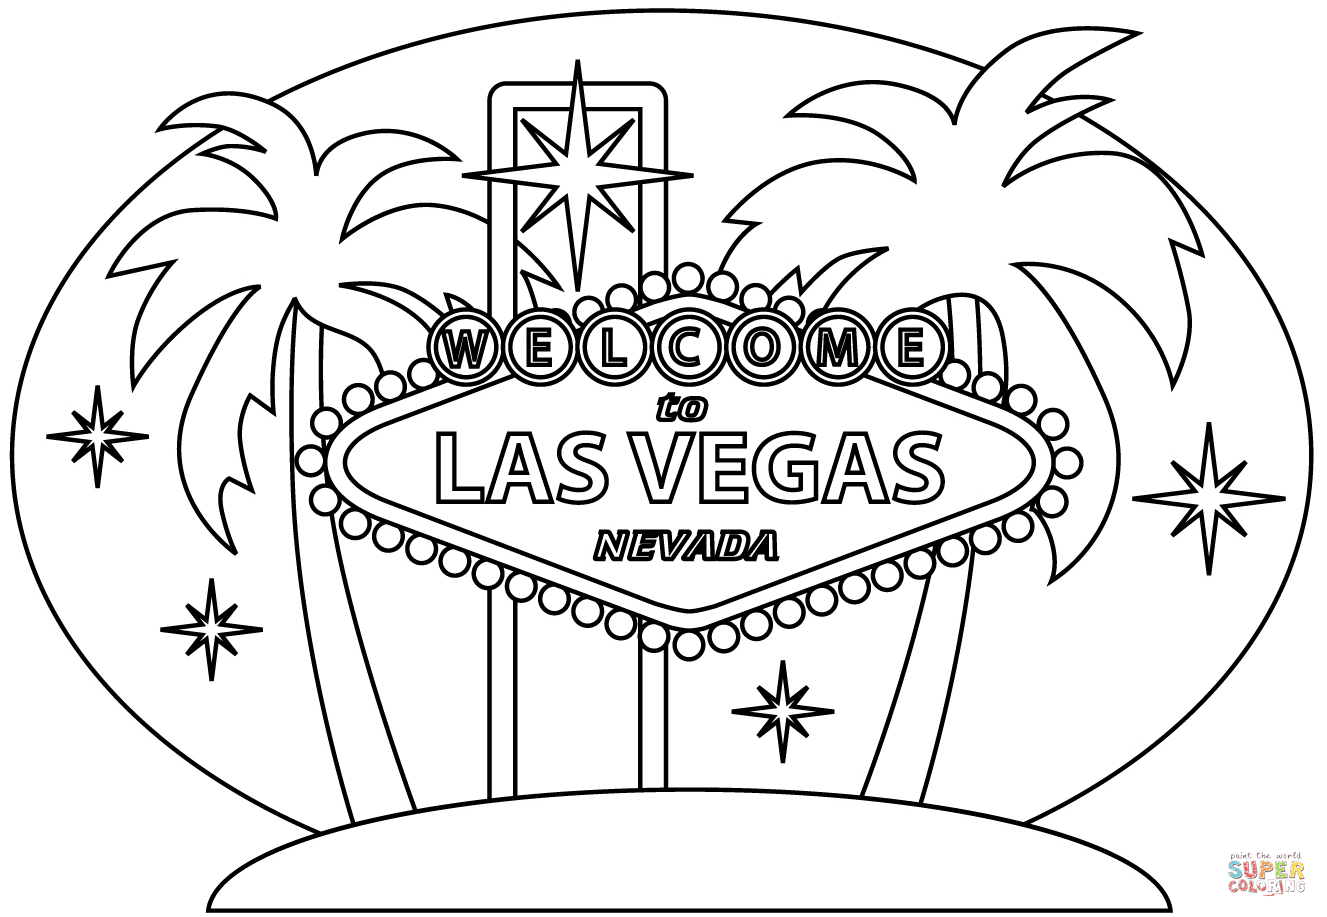 Las Vegas coloring page | Free Printable Coloring Pages